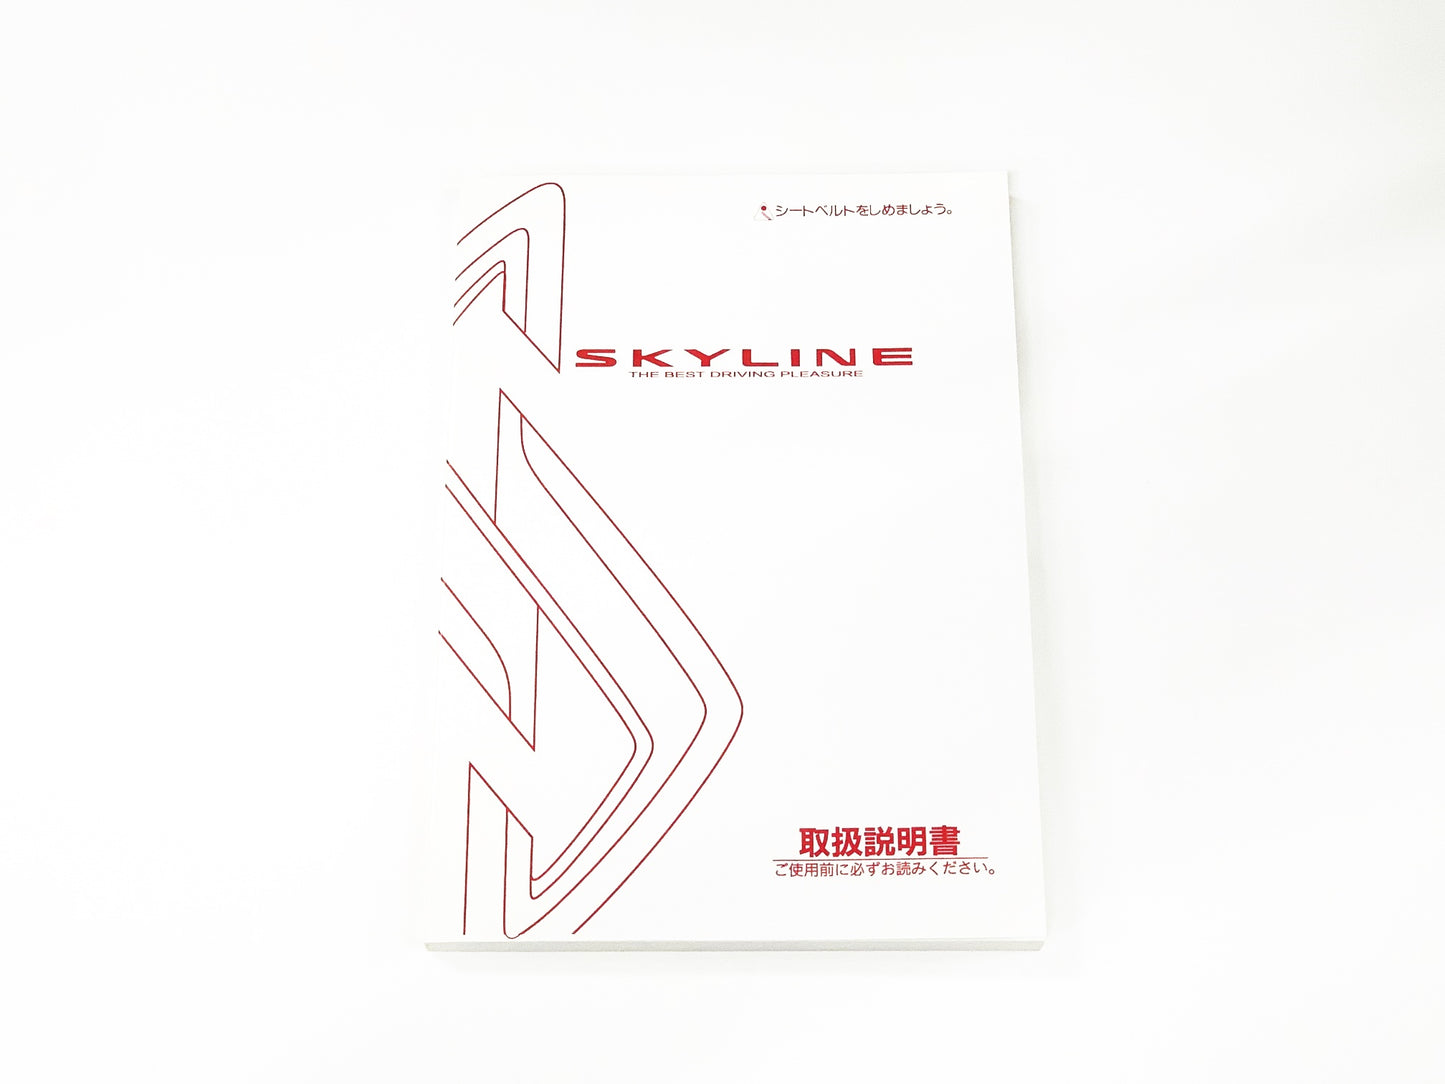 NISSAN Owners Manual Book - R34 BNR34 2000/10-2001/6 #663181358